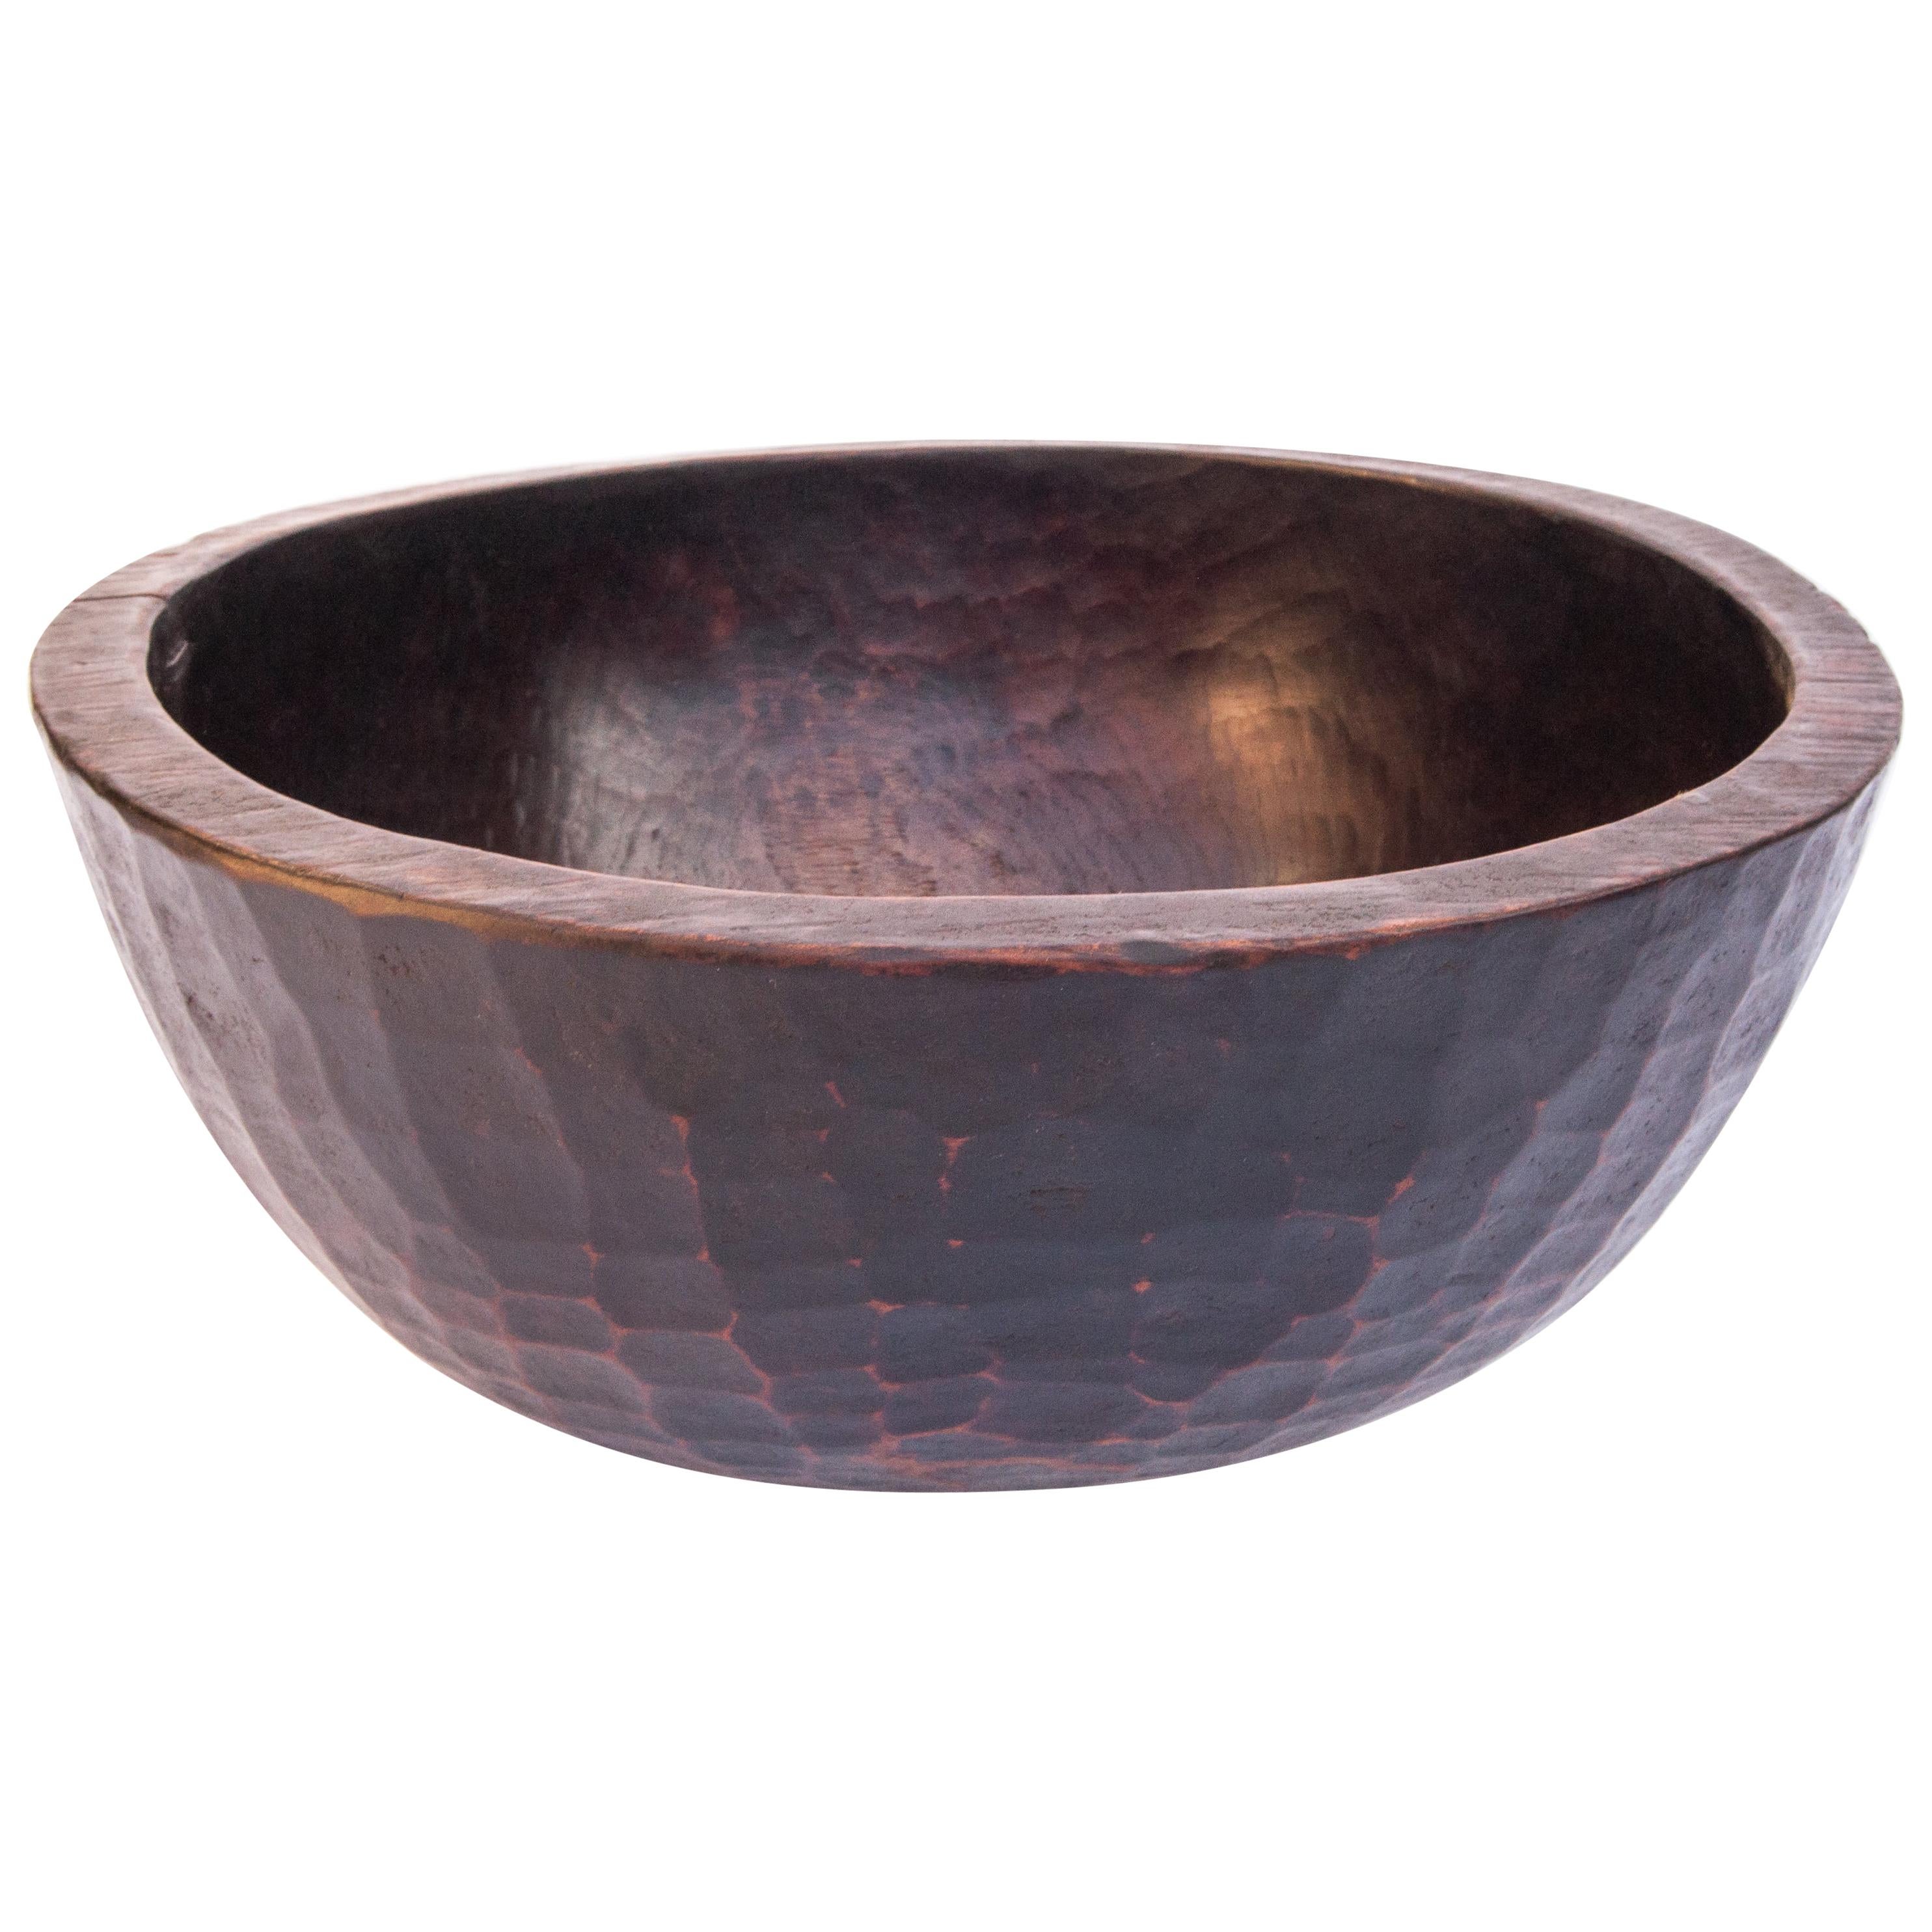 Old Tribal Wooden Bowl, West Nepal Himal, Mid-20th Century